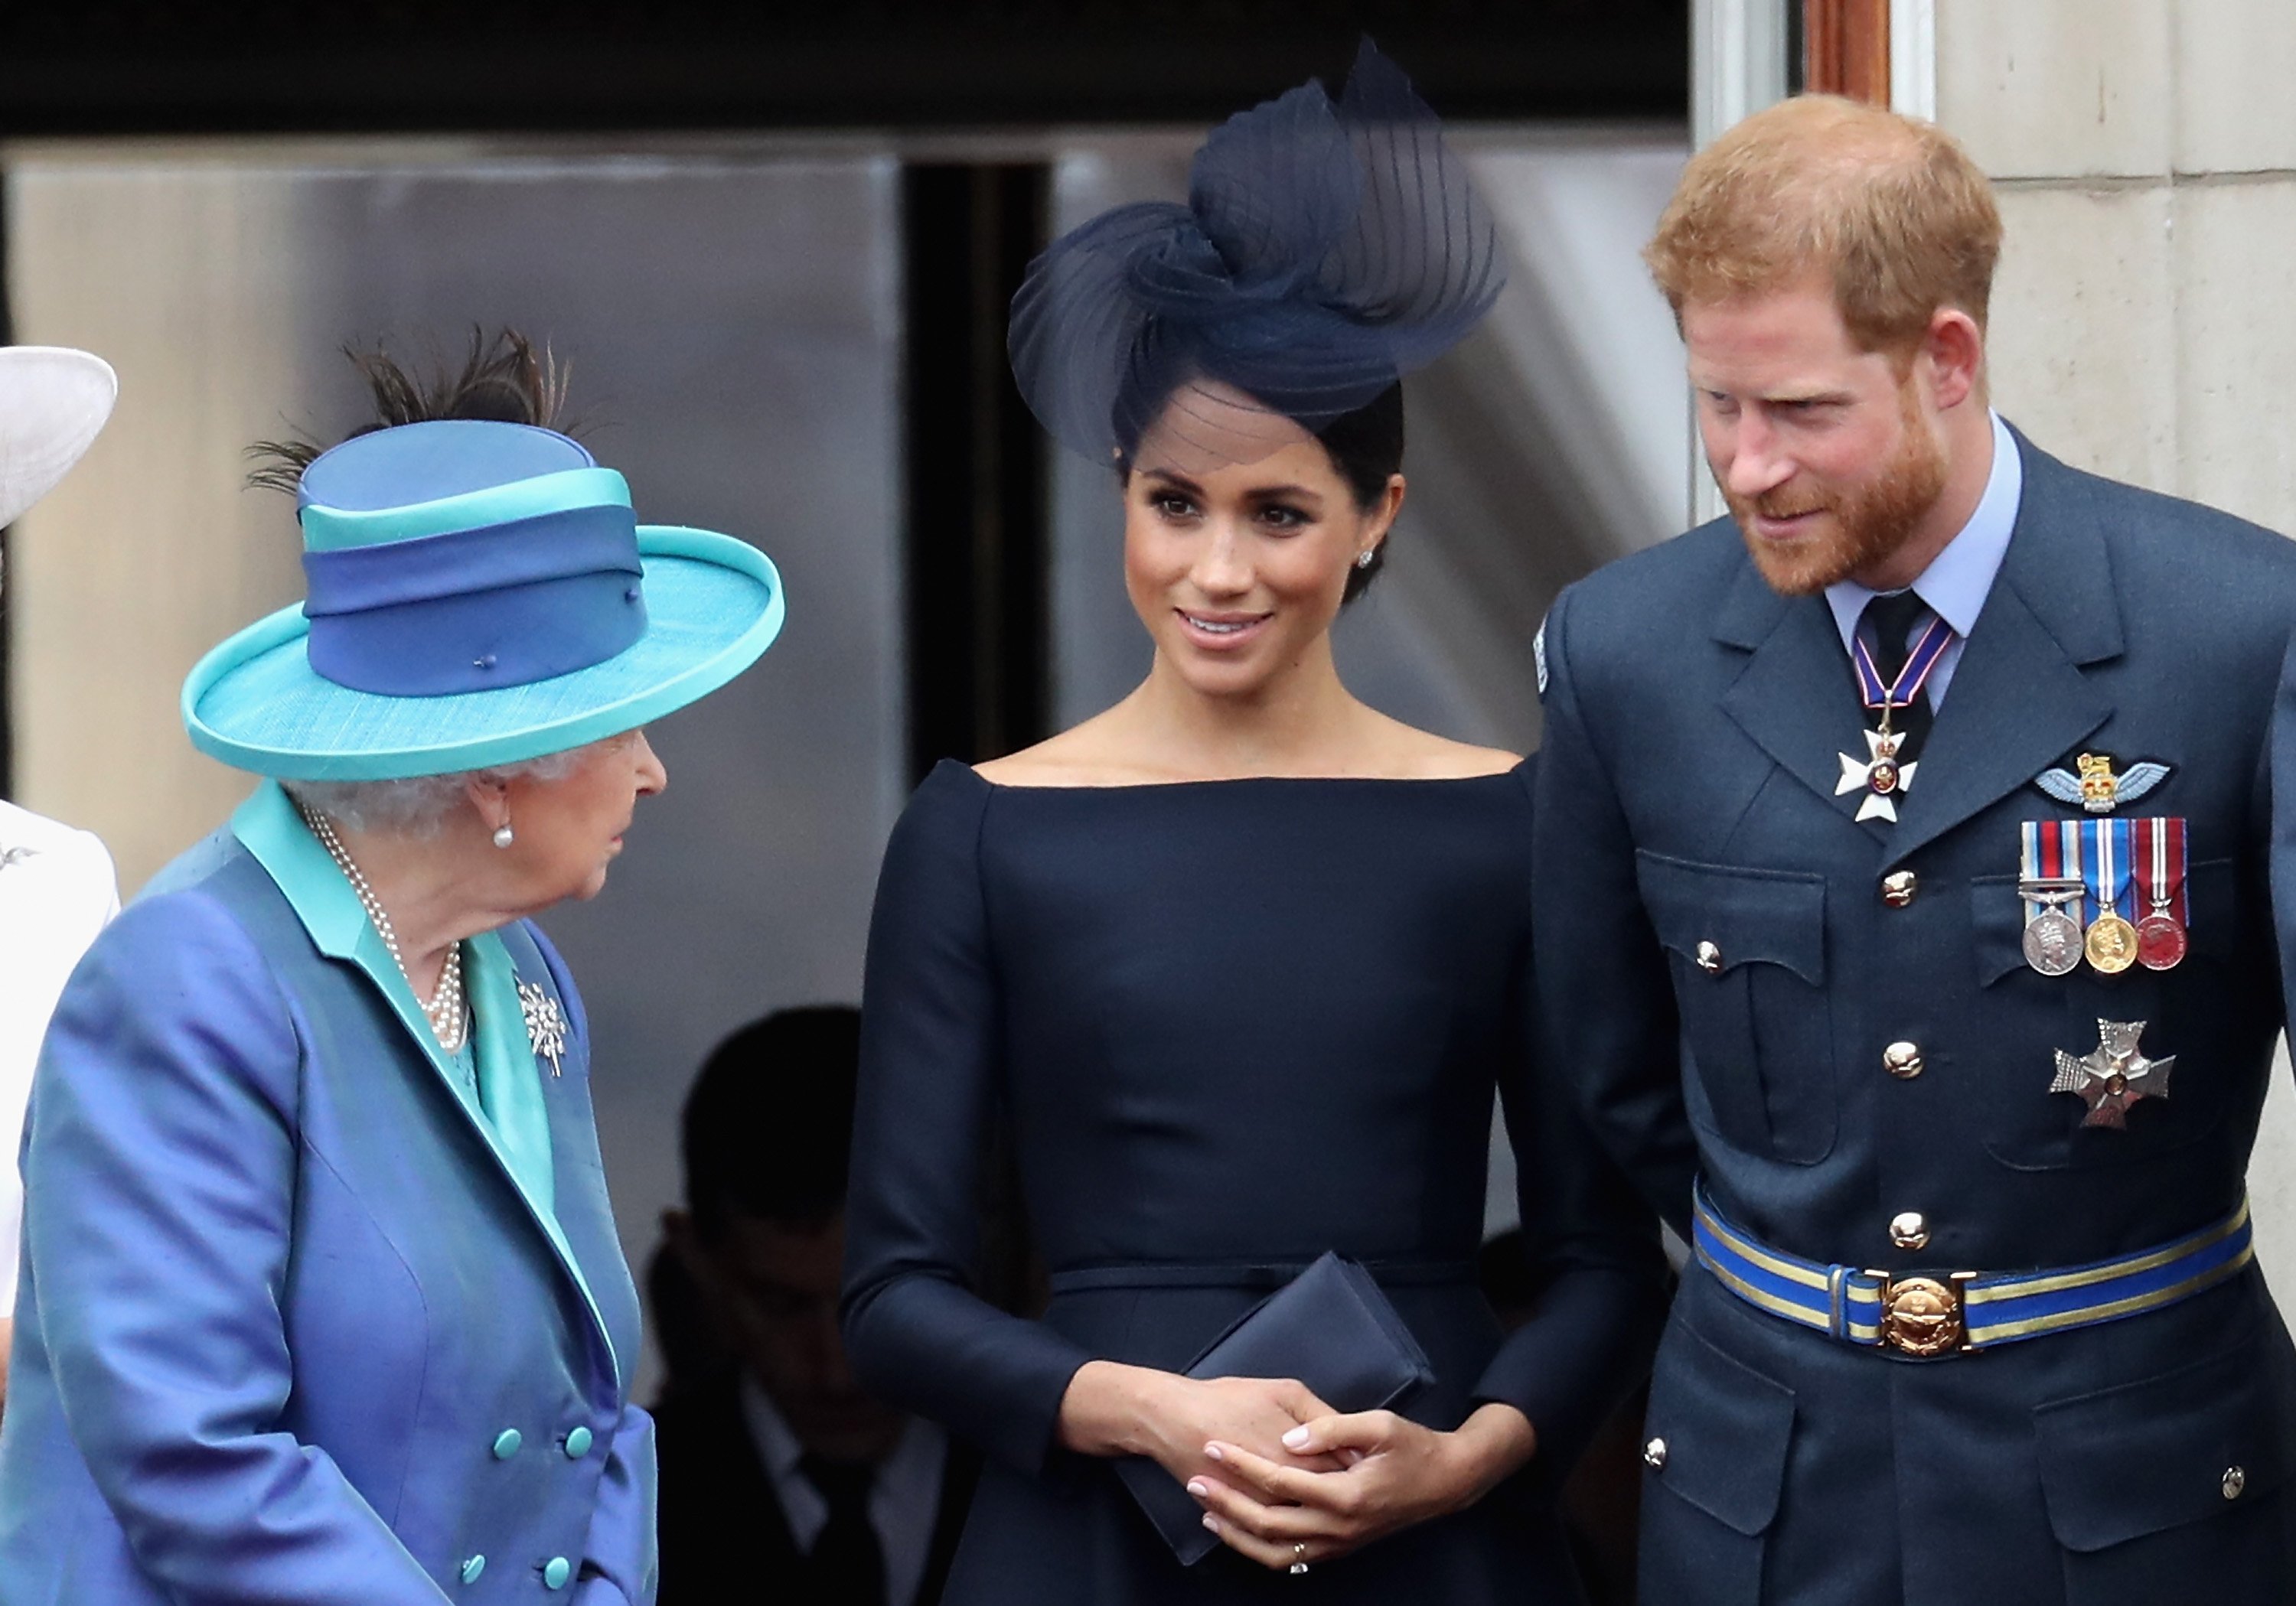 Queen Elizabeth II, Meghan Markle and Prince Harry watch the RAF flypast on the balcony of Buckingham Palace on July 10, 2018 in London, England | Source: Getty Images